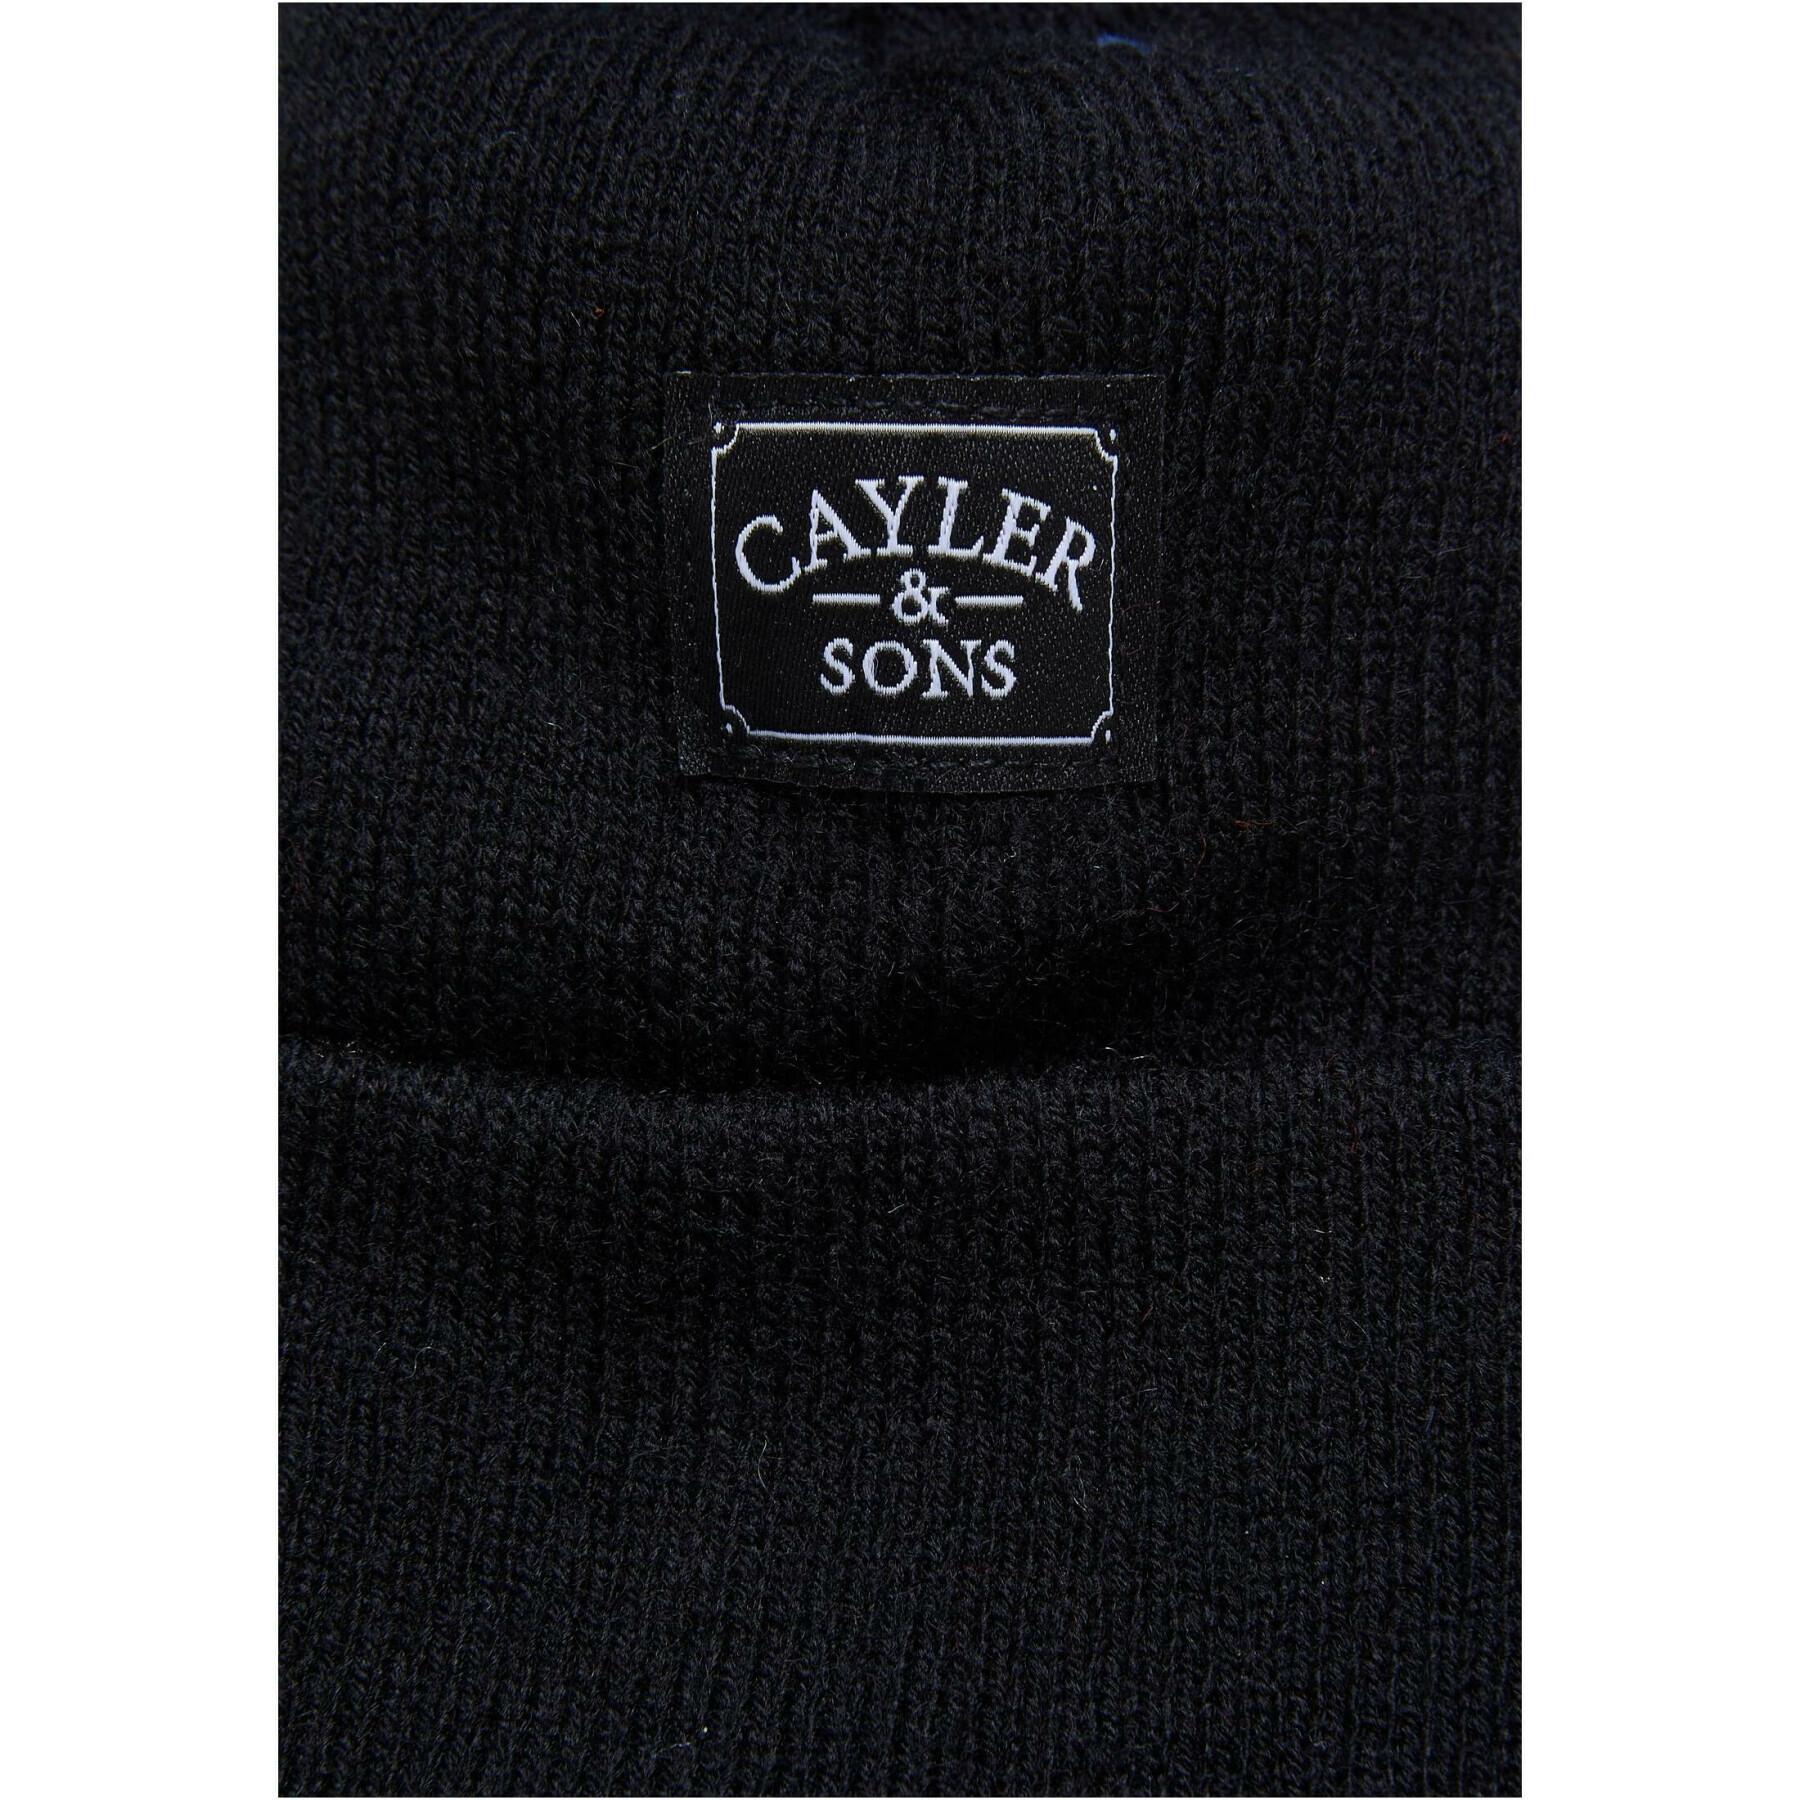 Gorro Cayler & Sons Heart for the Game Old School